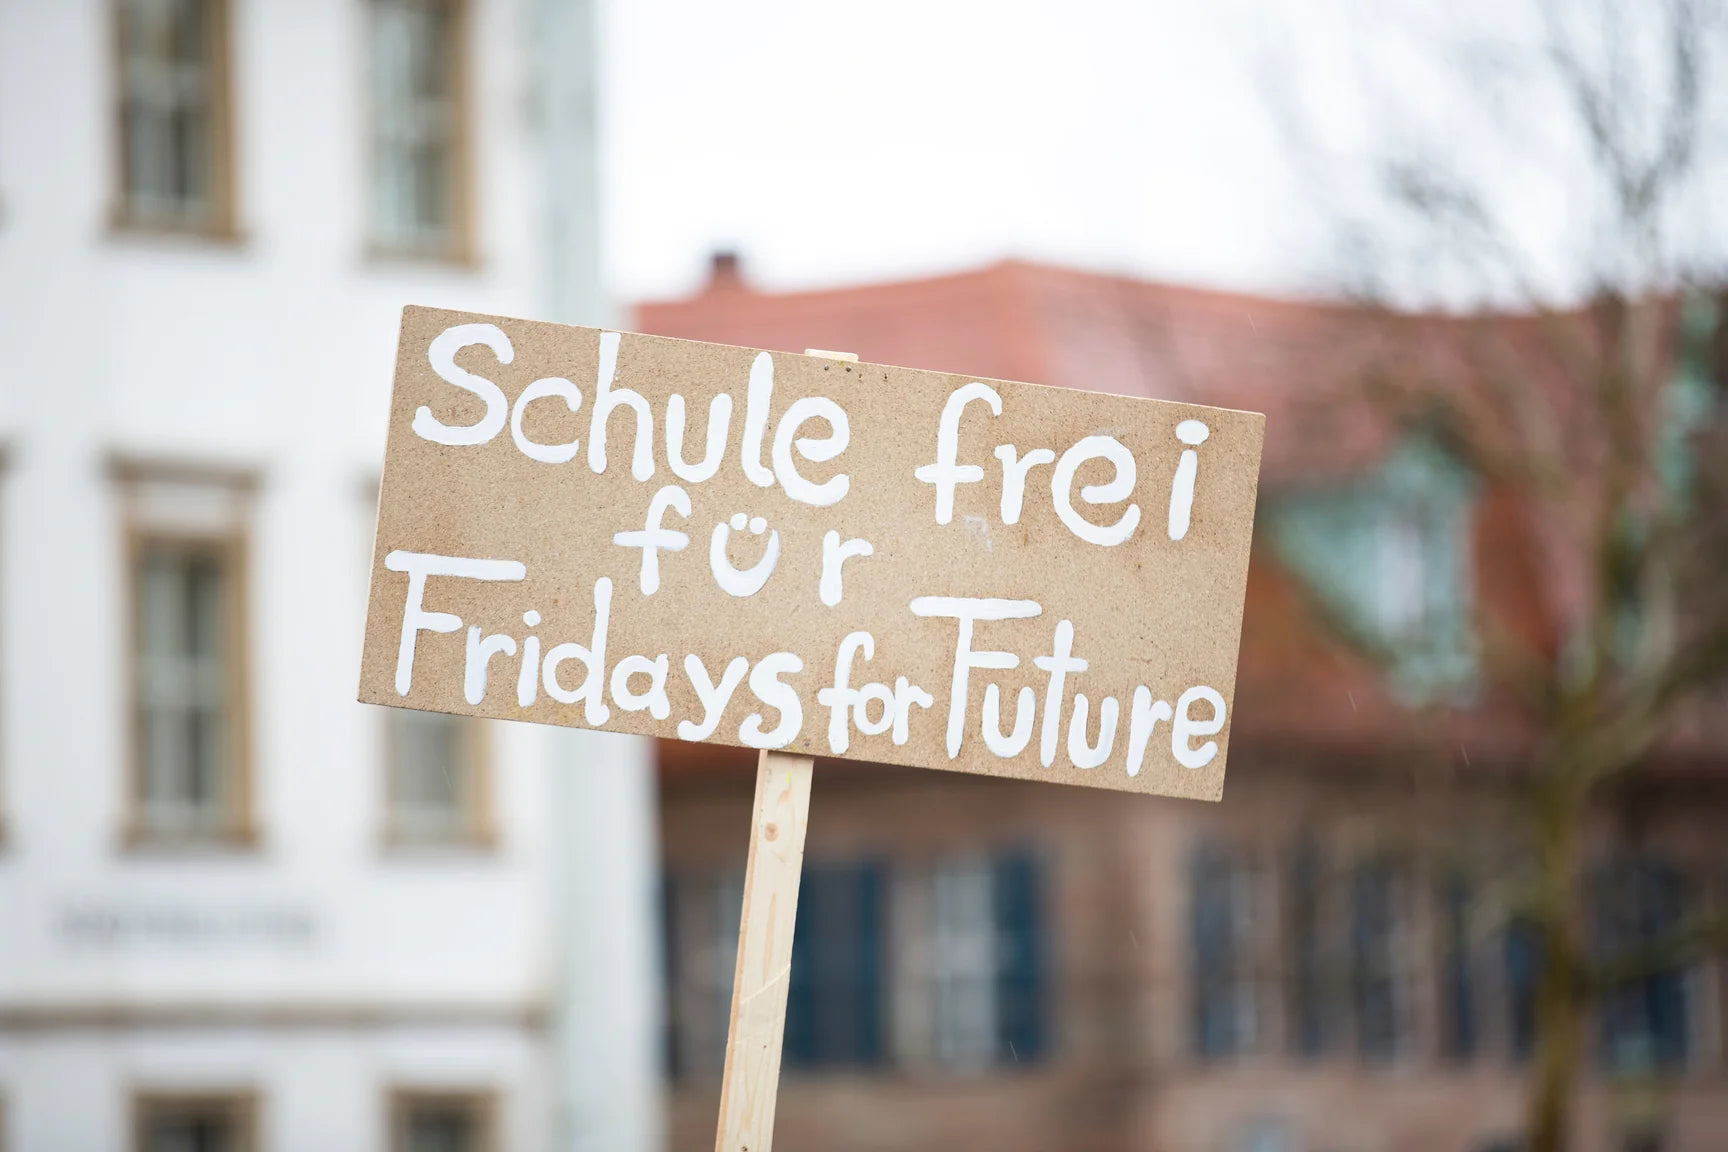 climate protest sign FridaysForFuture